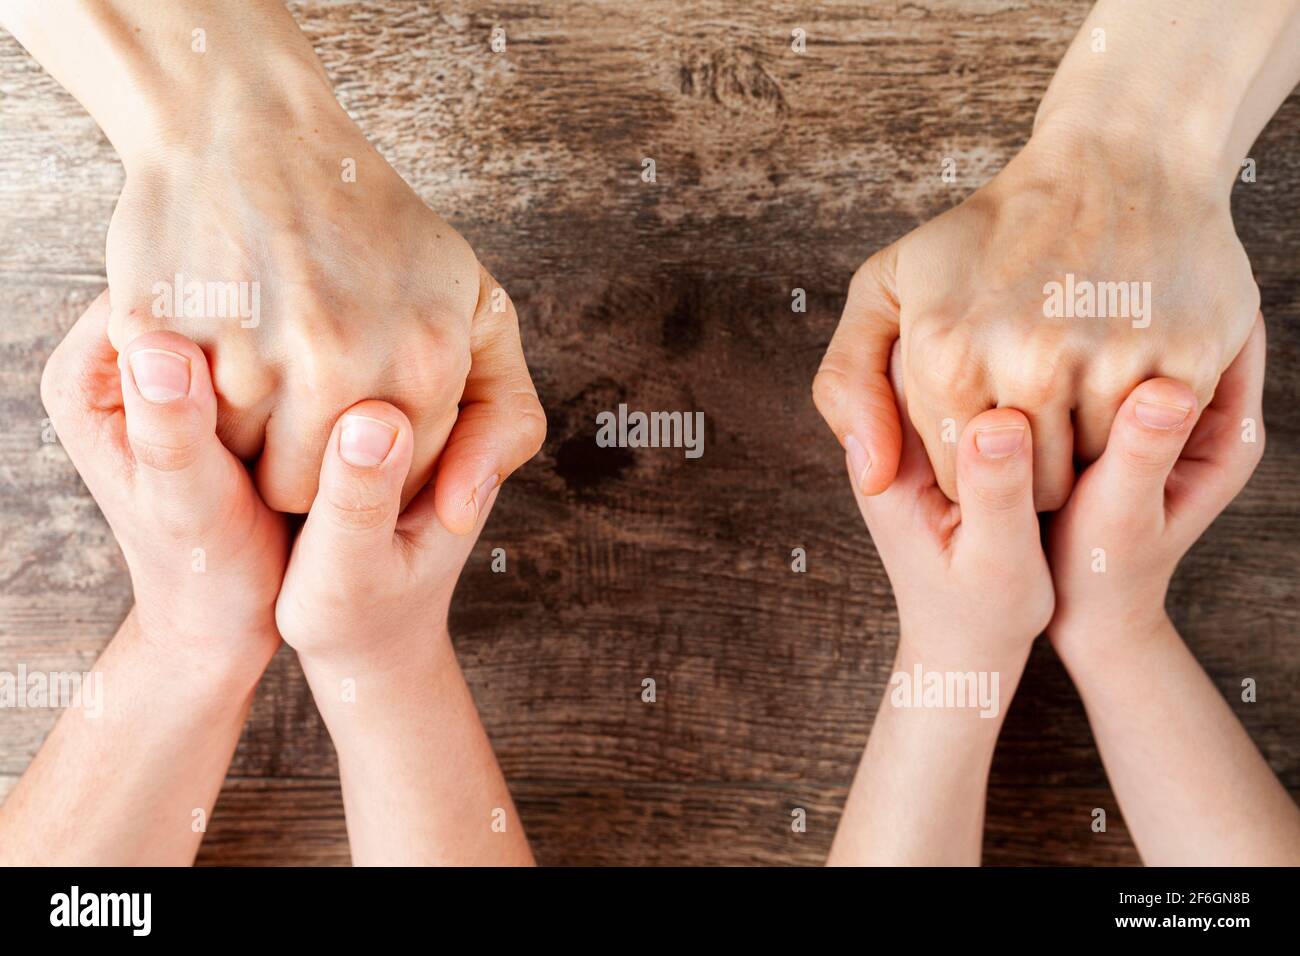 Abstract concept image showing two kids tightly holding hands of a woman. Single mom with two kids, family difficulties, staying strong, caring family Stock Photo